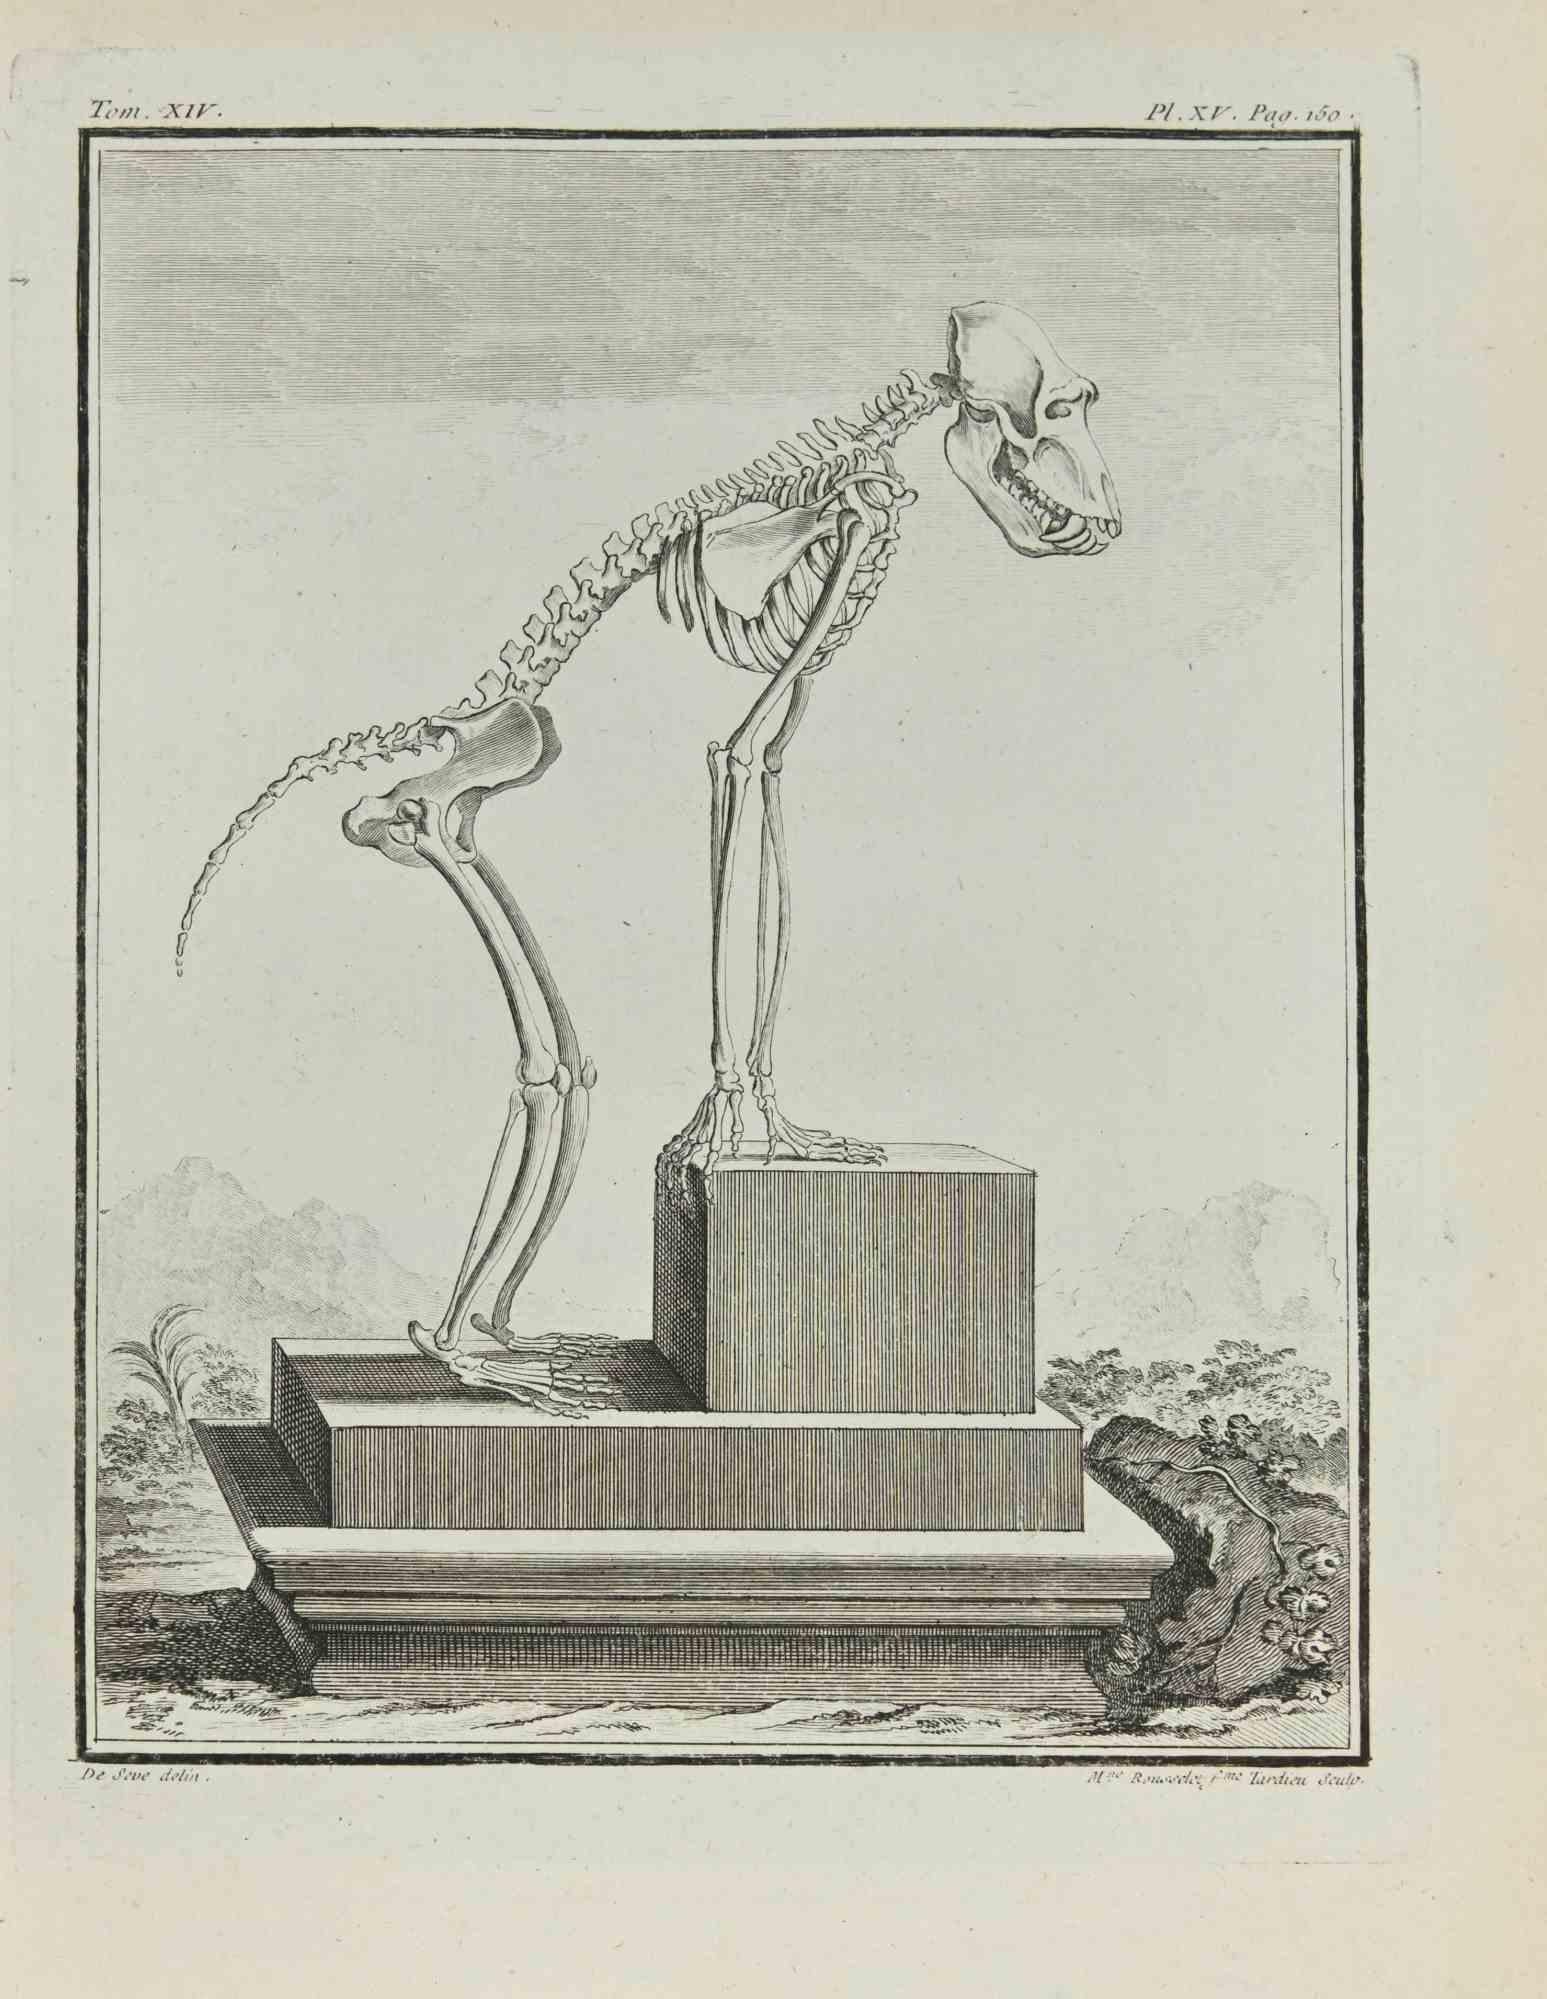 The Skeleton is an etching realized by Juste Madeline Rousselet in 1771.

It belongs to the suite "Histoire Naturelle de Buffon".

The Artist's signature is engraved lower right.

Good conditions